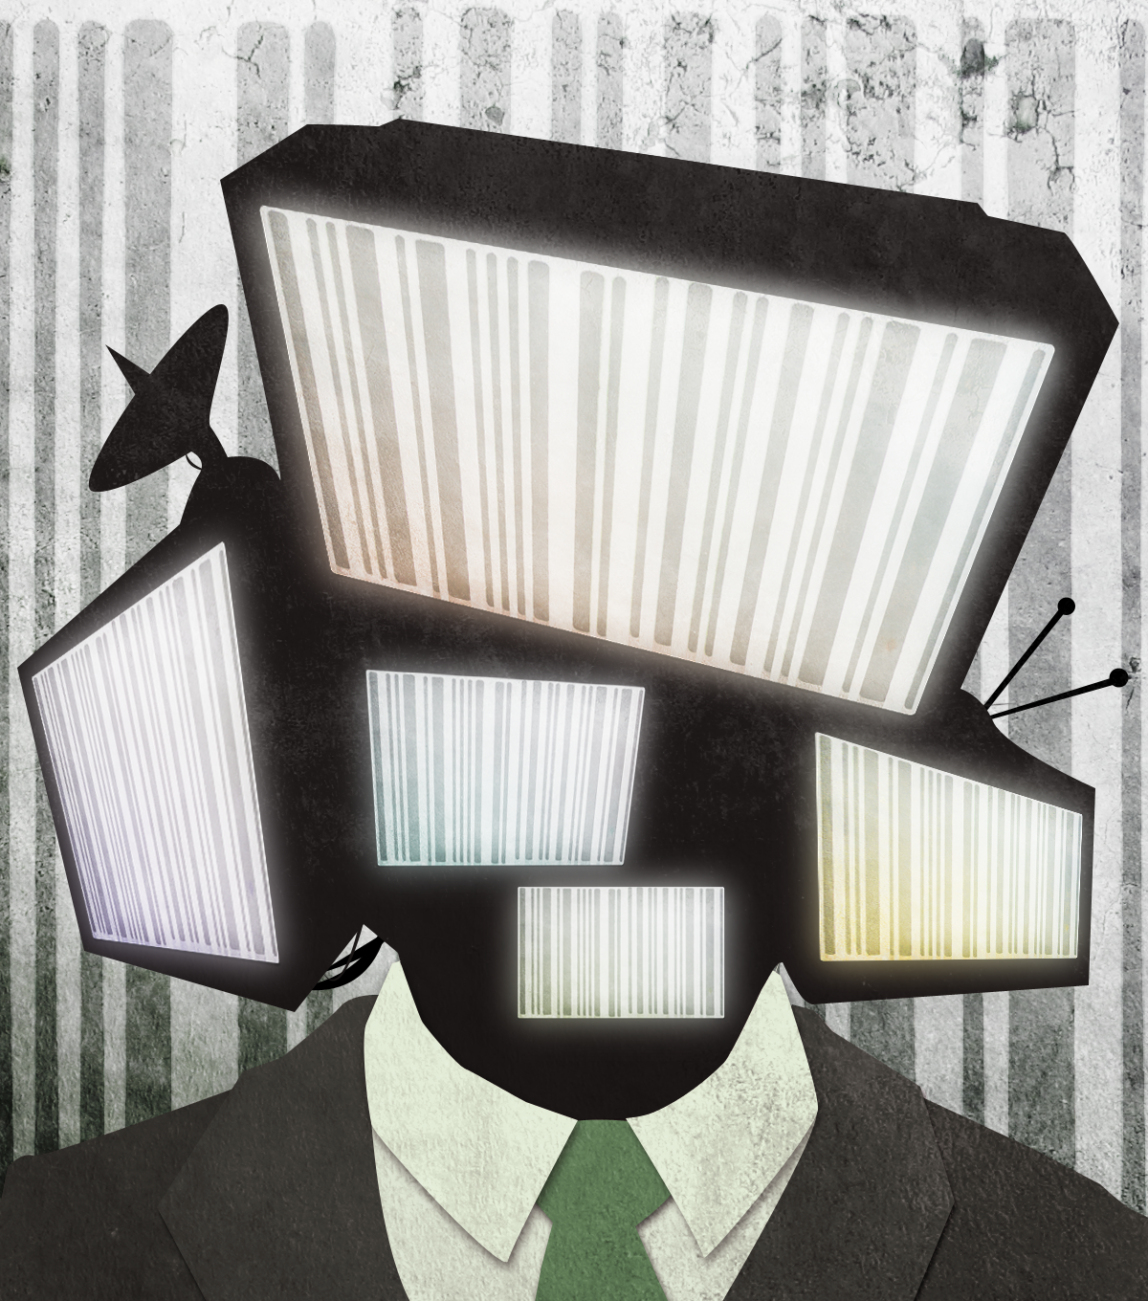 Illustration: Unequal Media by Jared Rodriguez (Credit: Truthout/flickr/cc)